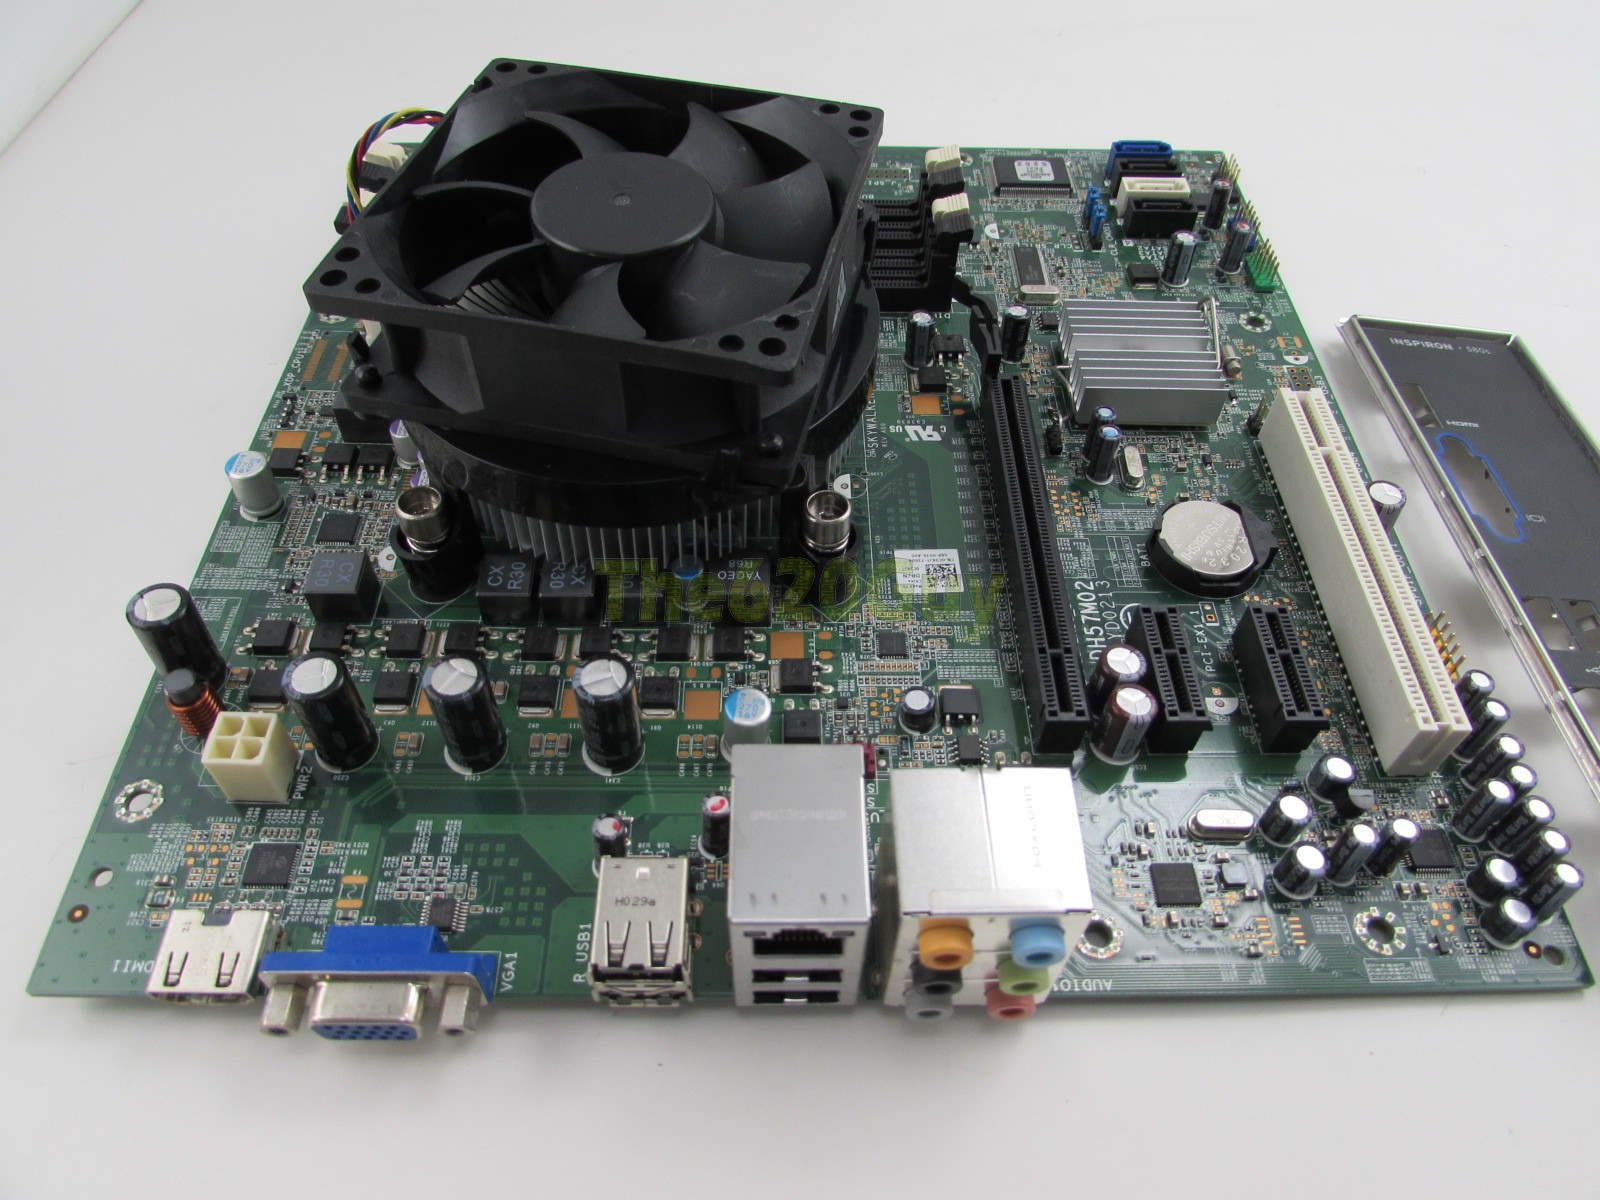 Dell Dh57m02 Motherboard Drivers Download